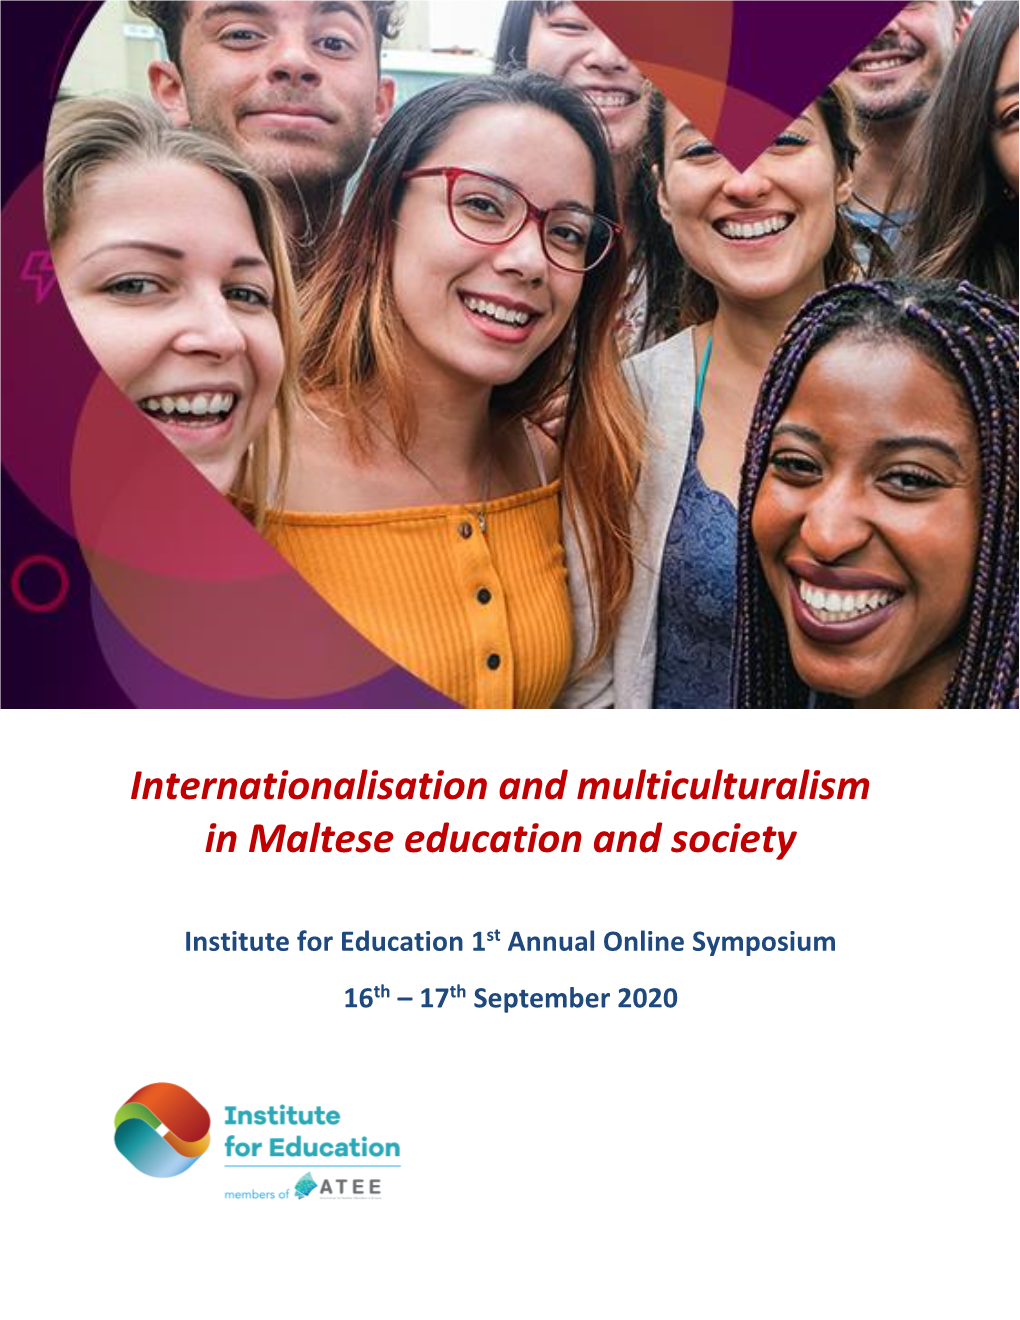 Internationalisation and Multiculturalism in Maltese Education and Society